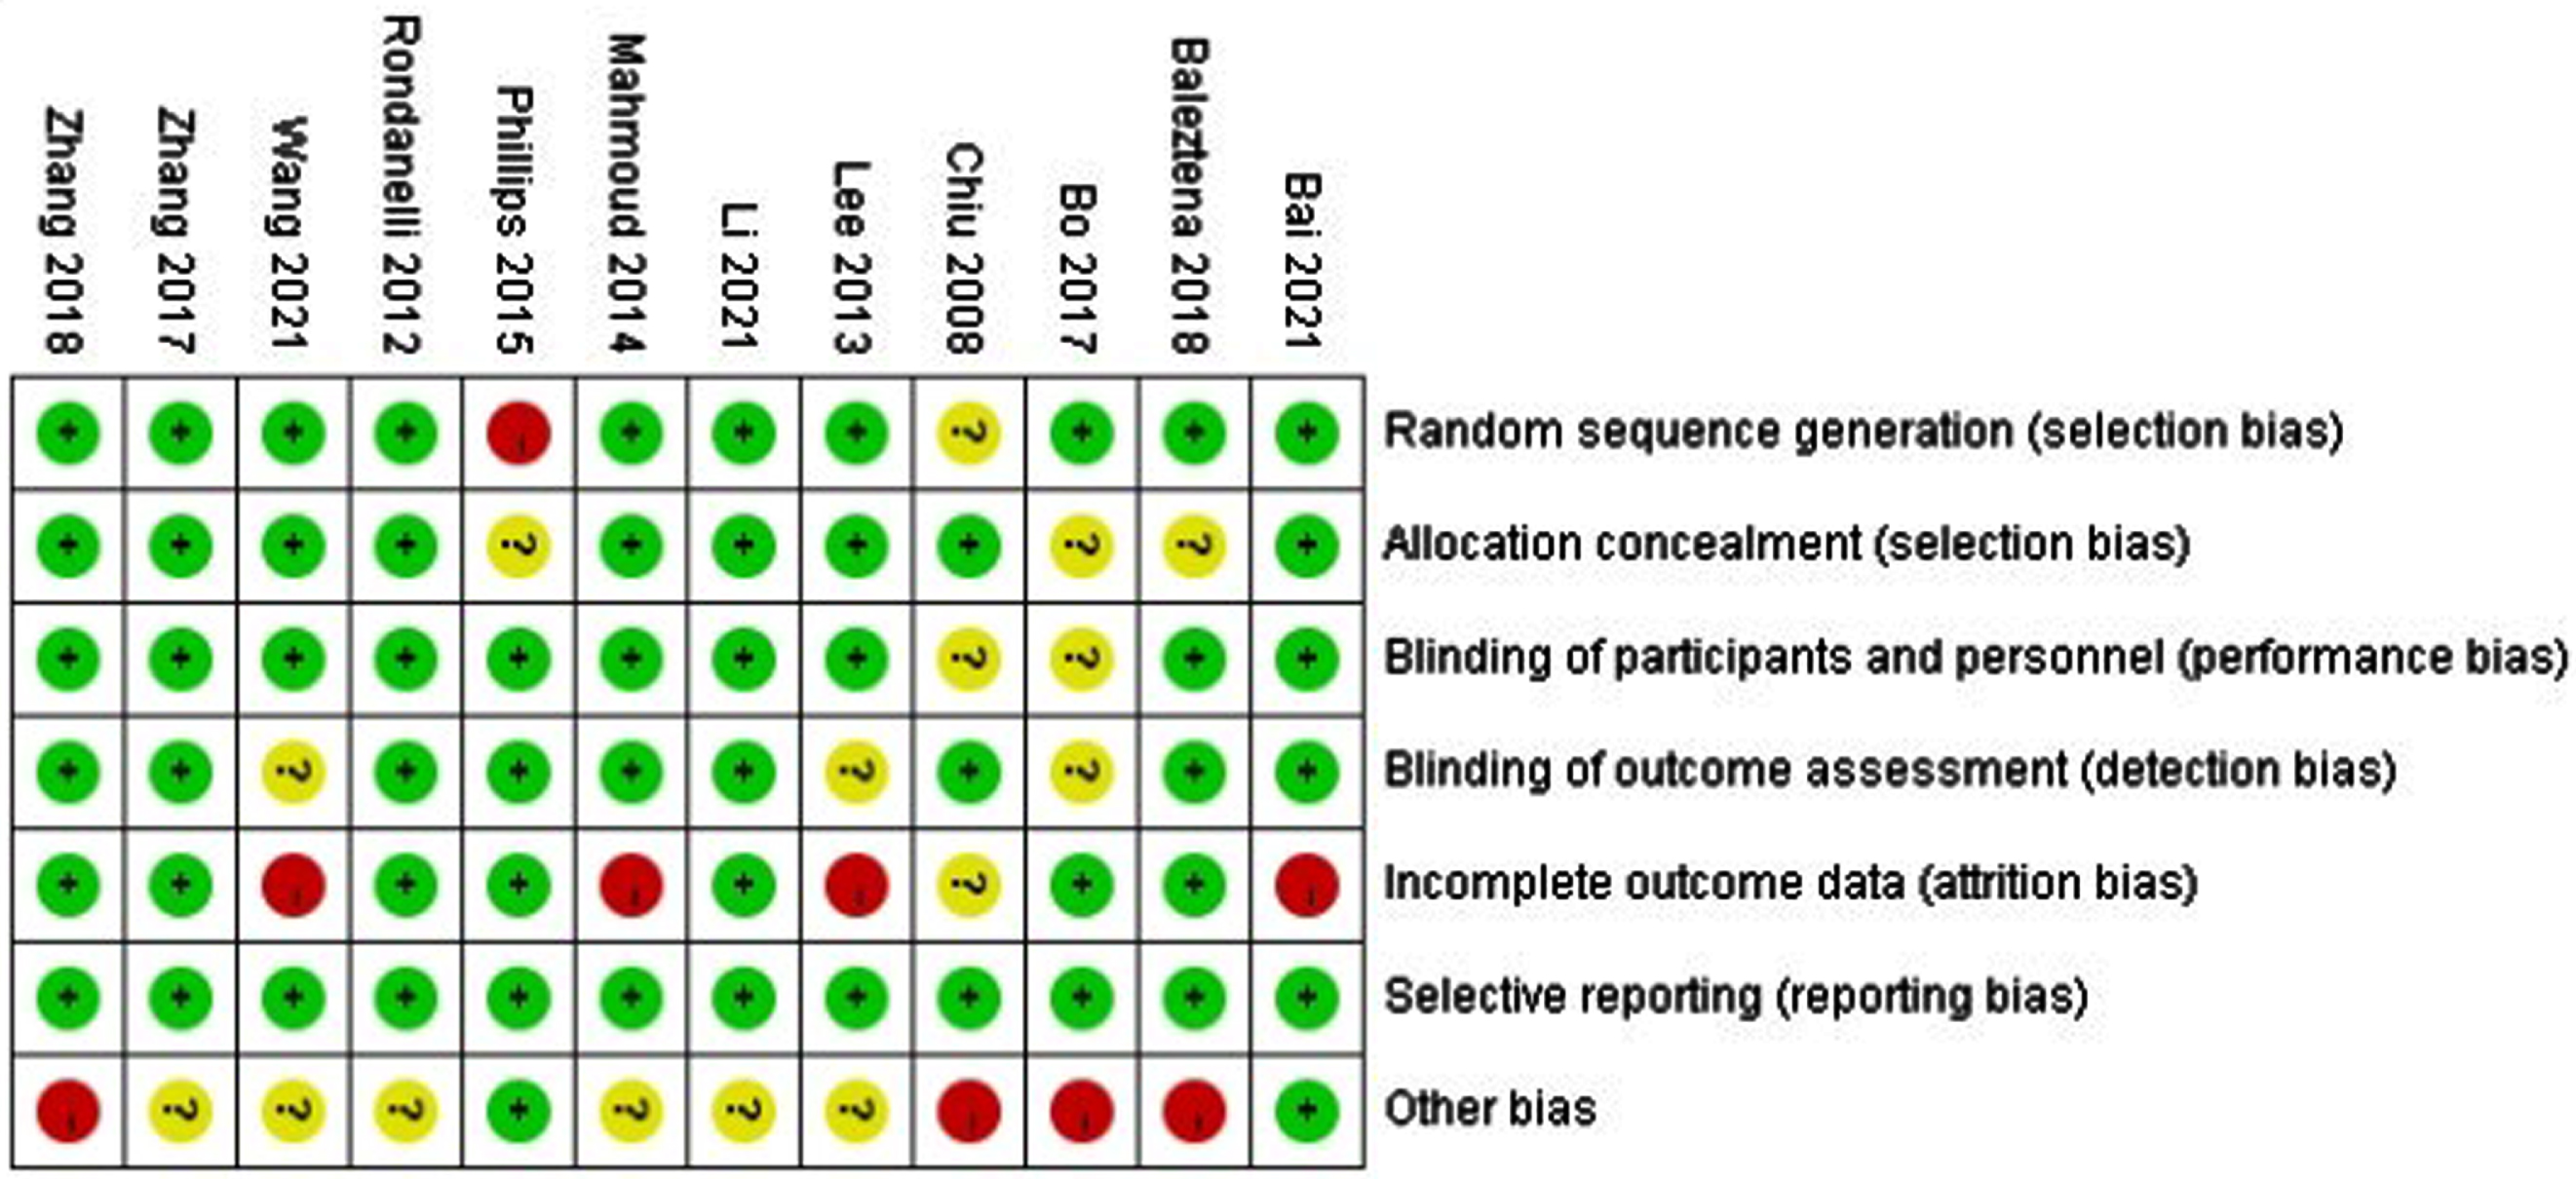 Risk of bias in the included studies